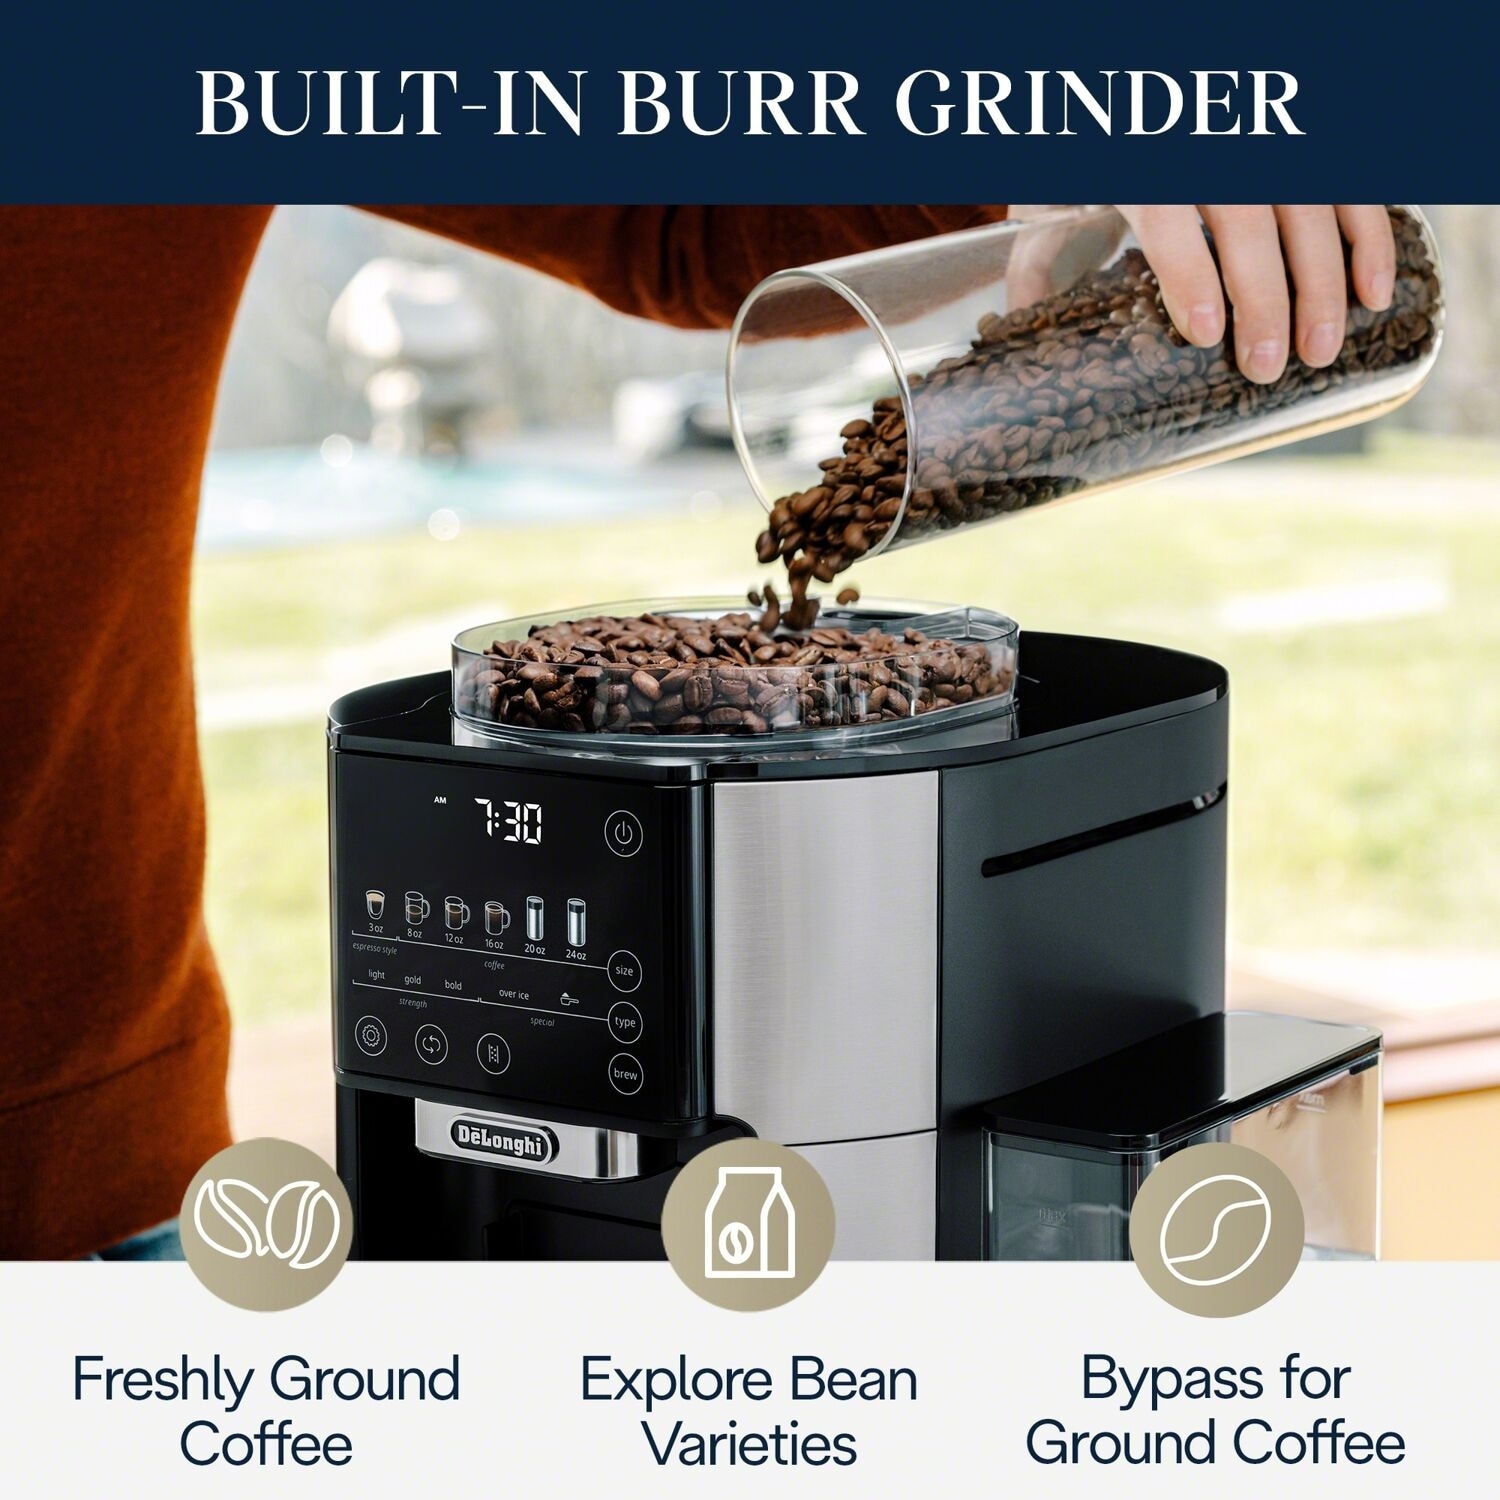 Beanque launches 3-In-1 On-the-go Automatic Coffee Maker on